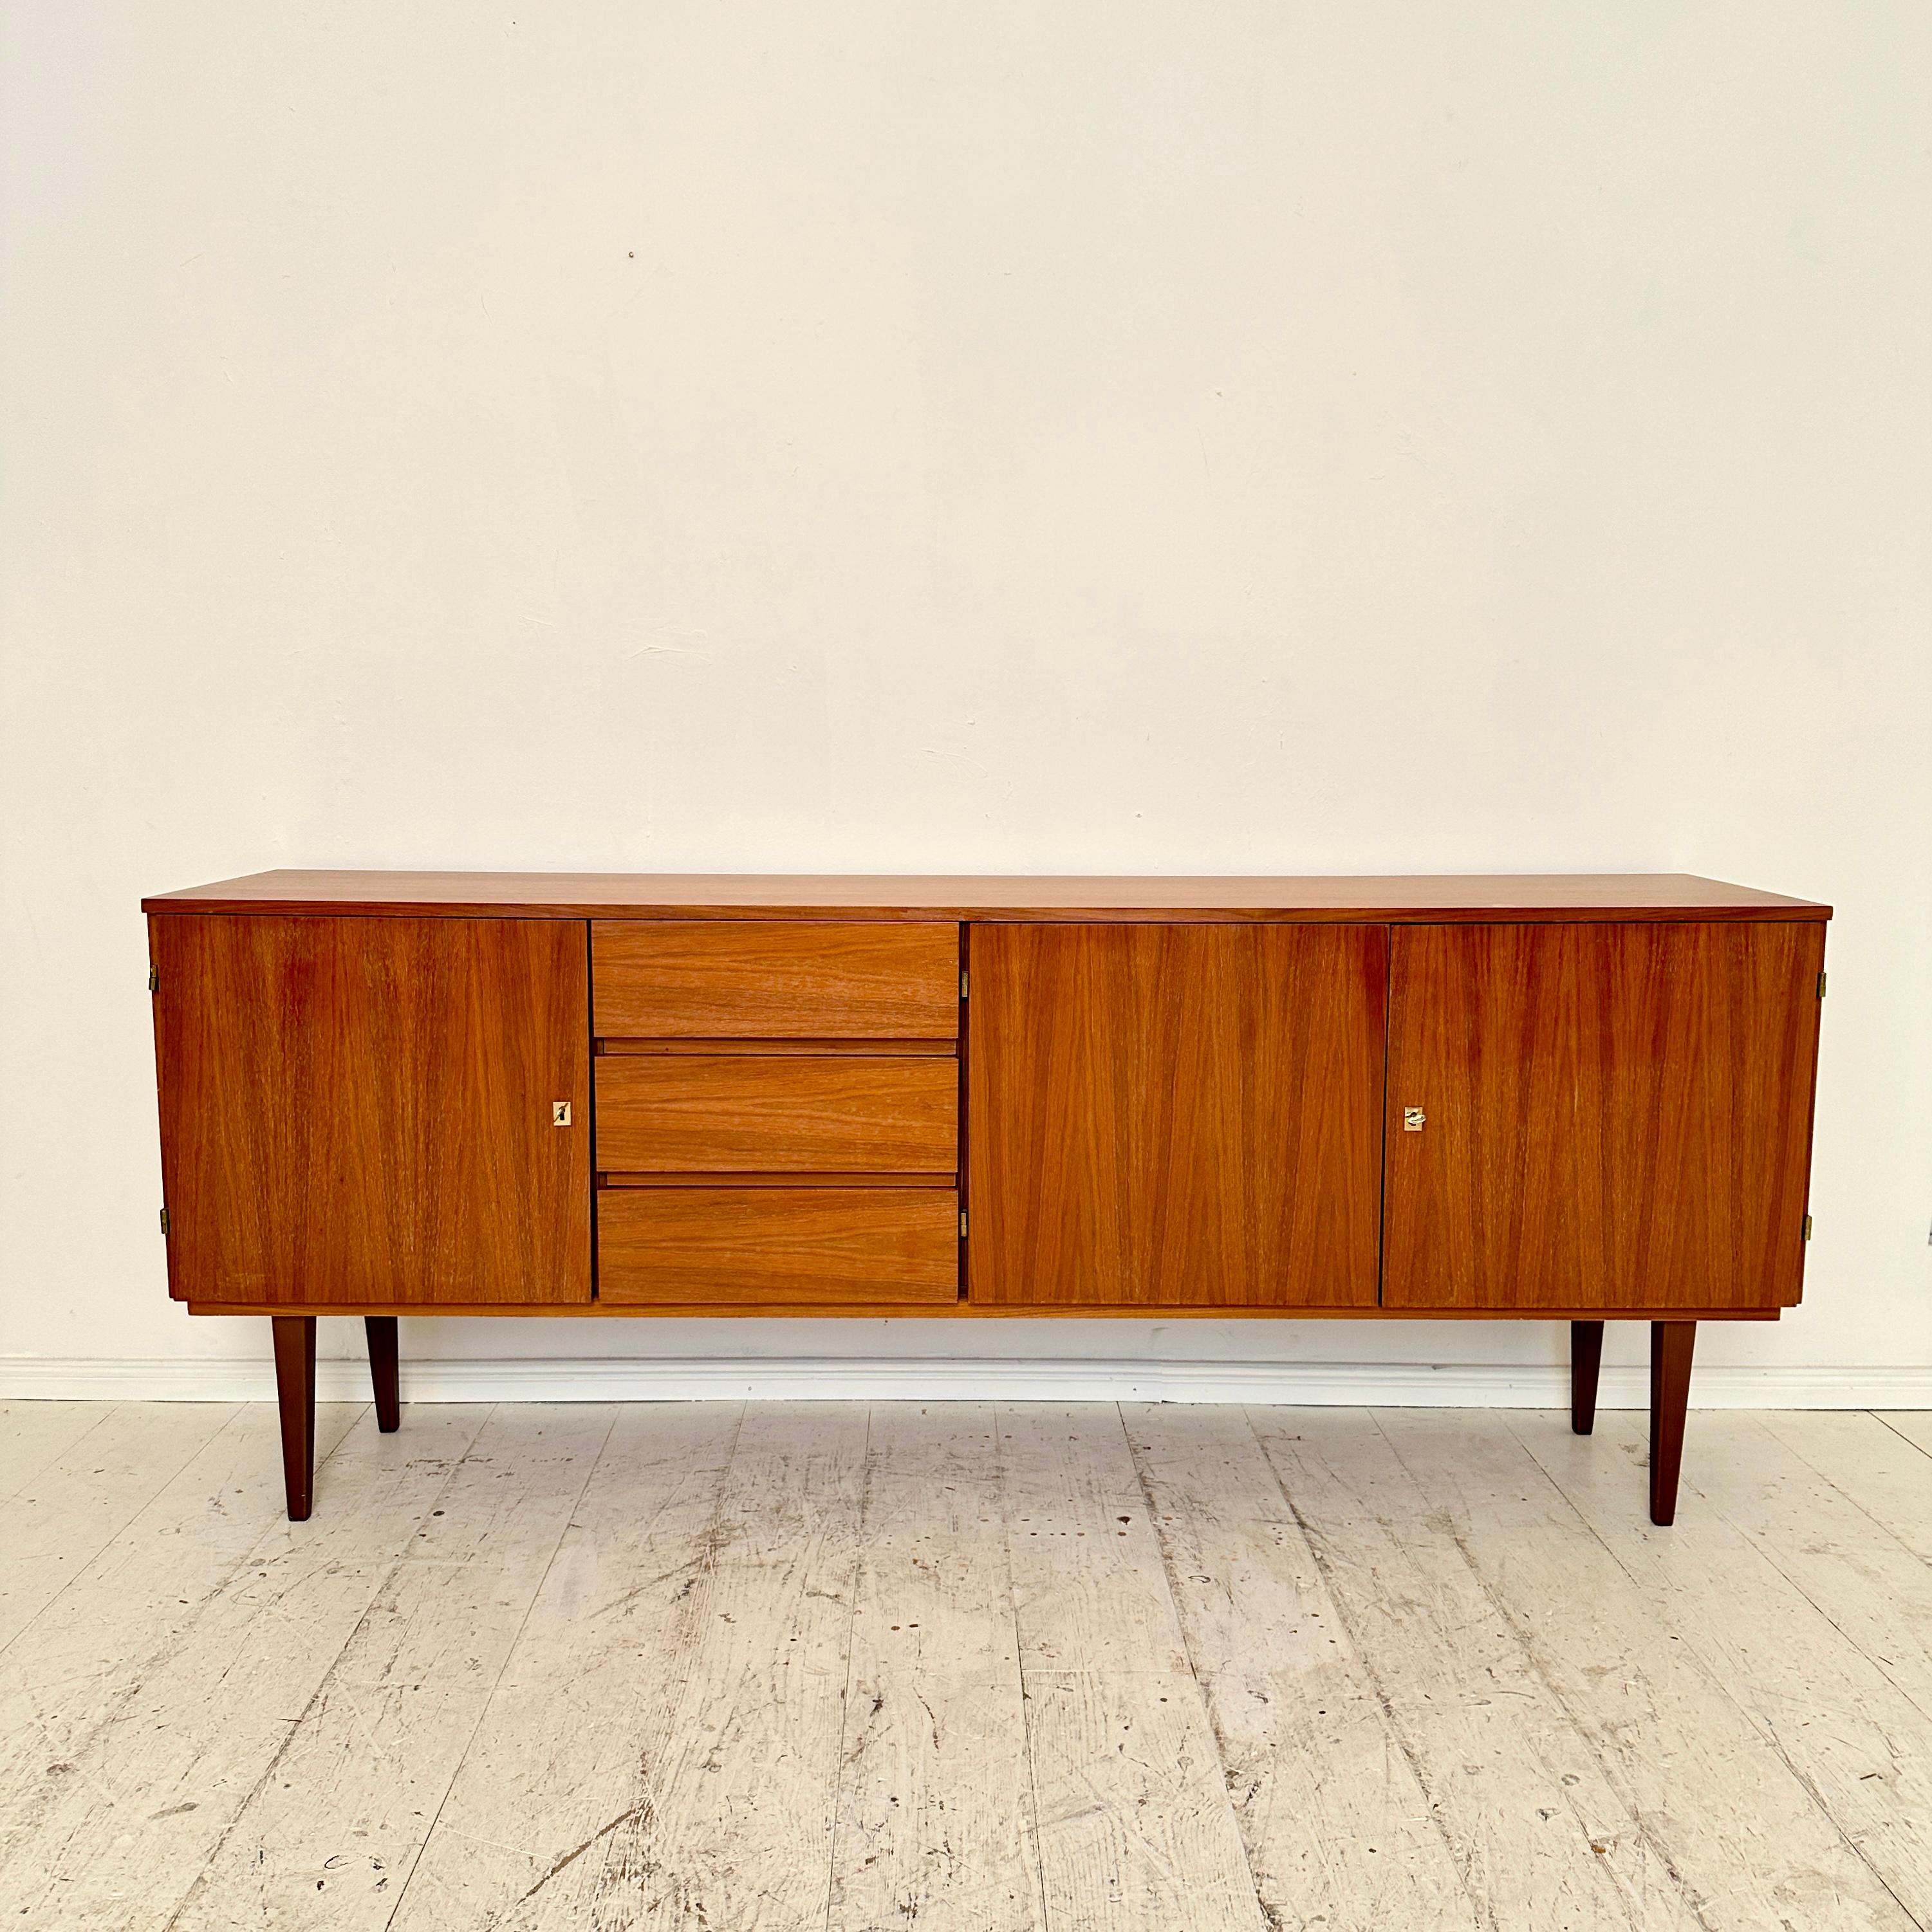 Dating back to the 1960s, this Mid-Century German Sideboard in rich brown walnut is a testament to the era's impeccable design sensibilities. With three drawers and three doors, it seamlessly marries form and function. The warm walnut woodgrain,